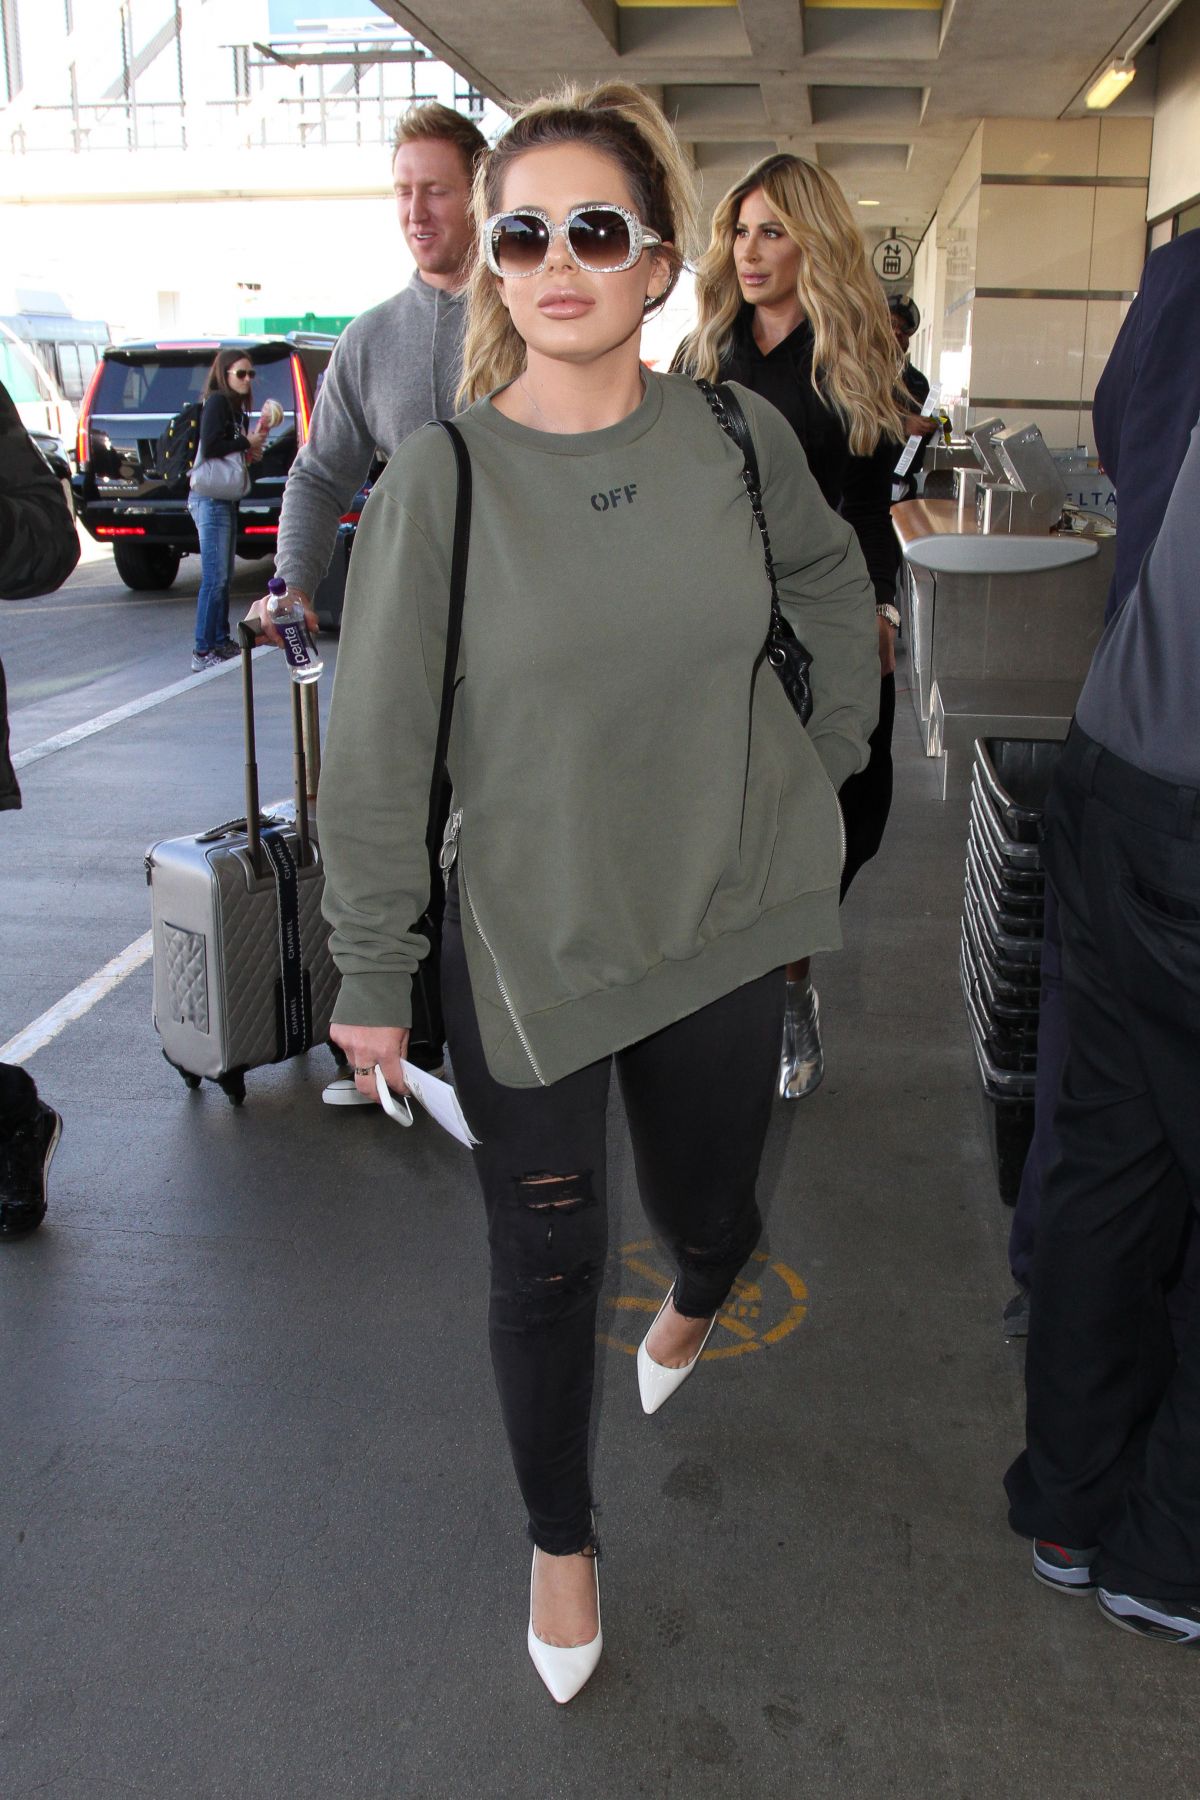 Brielle Biermann at LAX Airport in Los Angeles - March, 2017